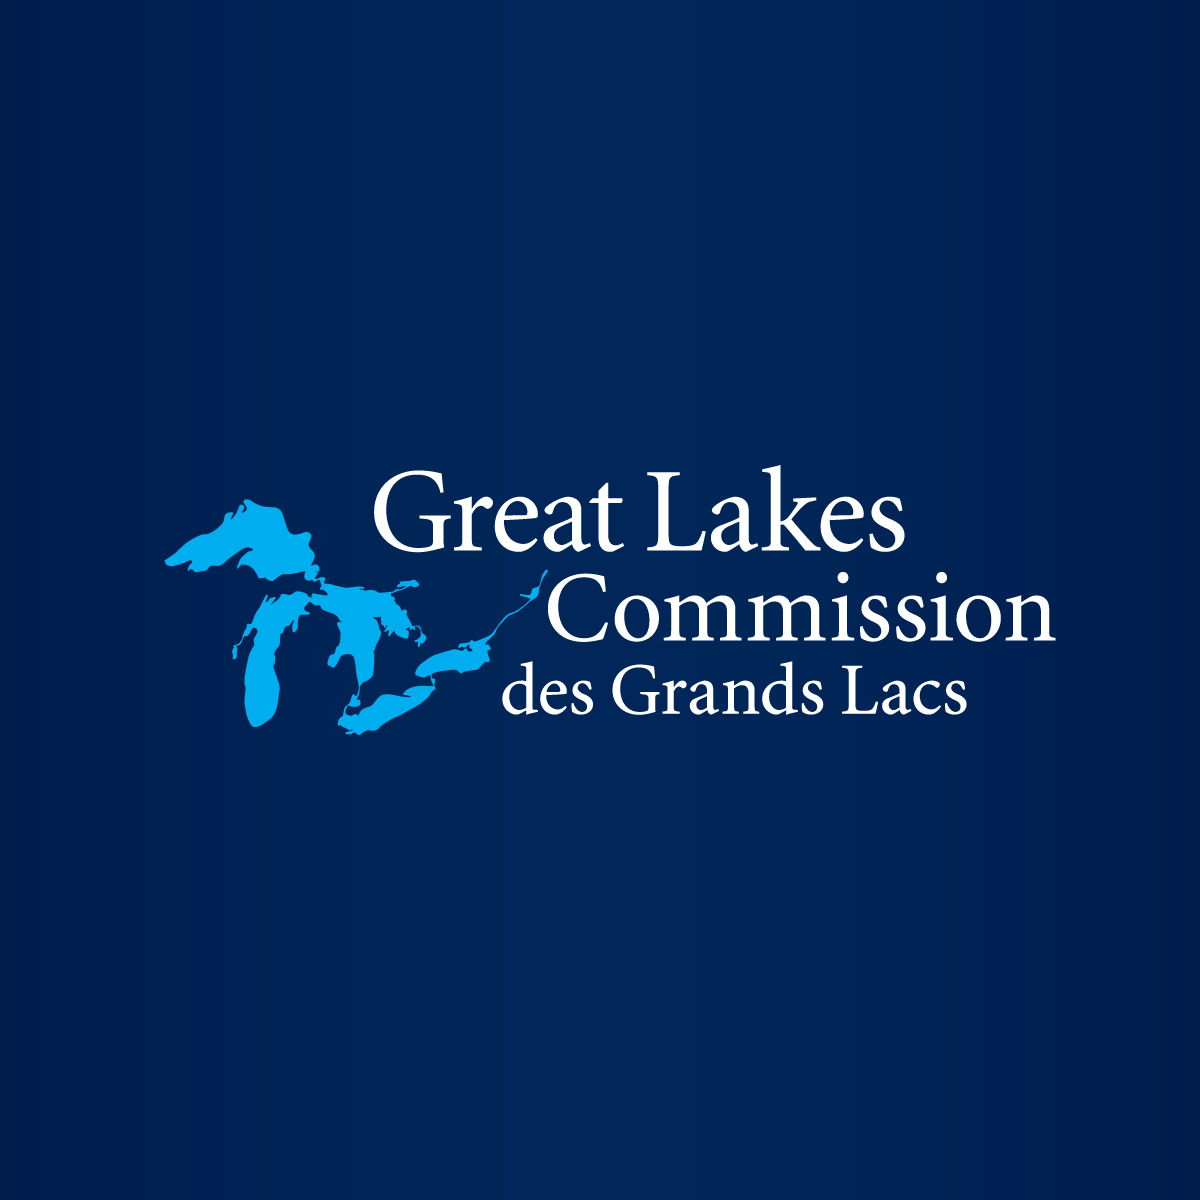 Great Lakes resurrection: Muskegon Lake transforms from industrial dump to ‘ridiculous’ potential